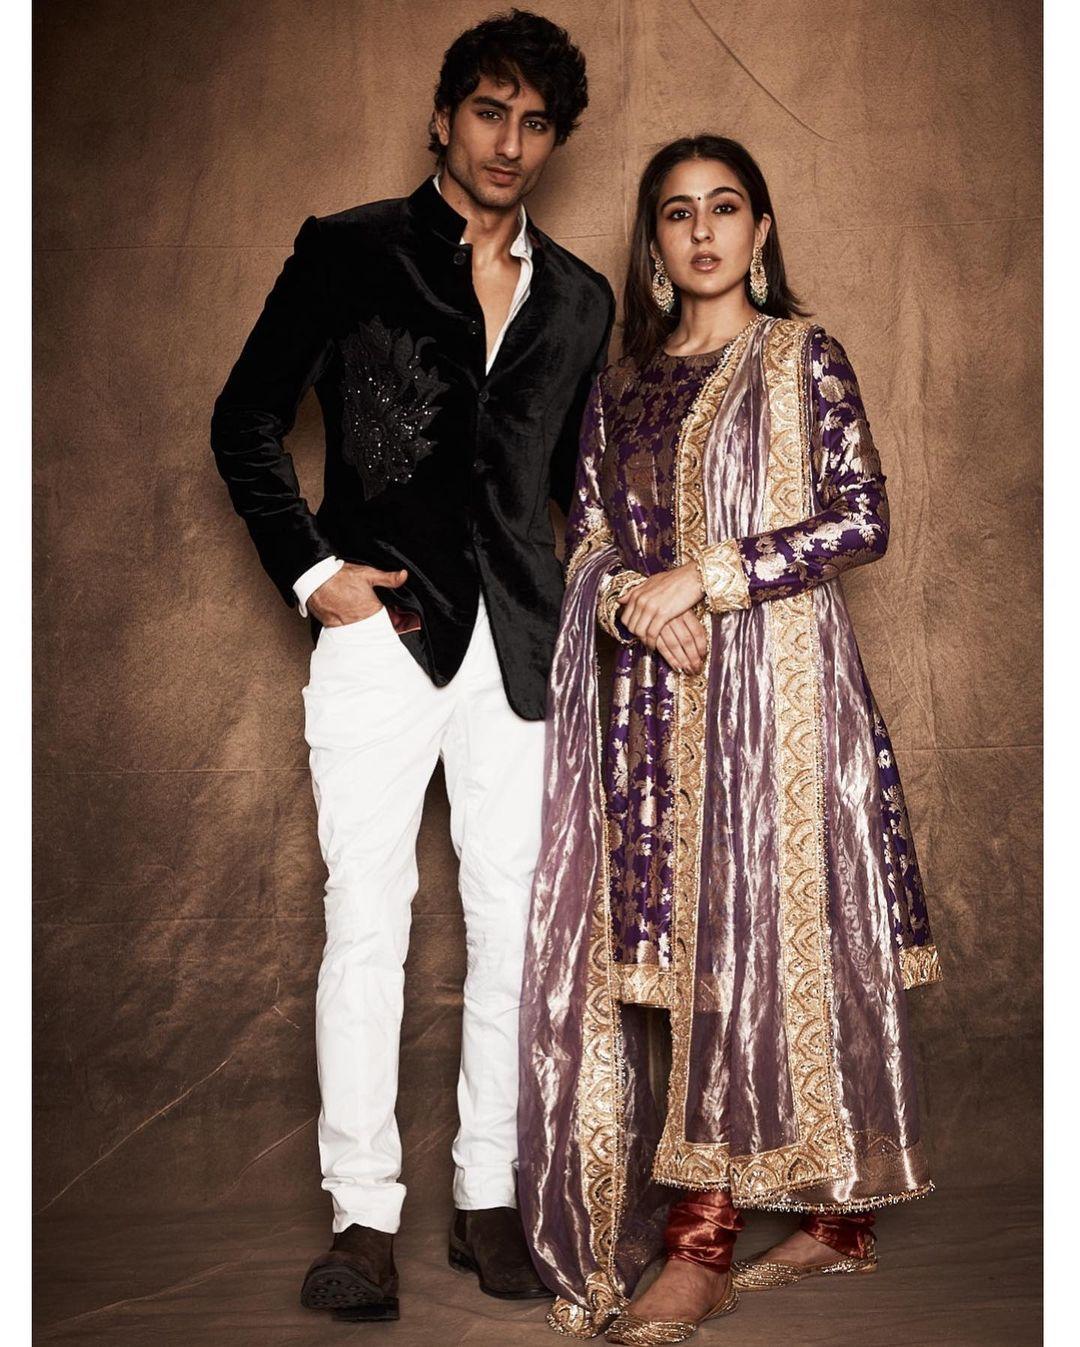 This Diwali was fun wali for the duo as Sara Ali Khan and Ibrahim Ali Khan enjoyed with their extended family. For the special occasion, Sara wore a stunning purple colour kurta set and Ibrahim complemented her in a black and white traditional attire 